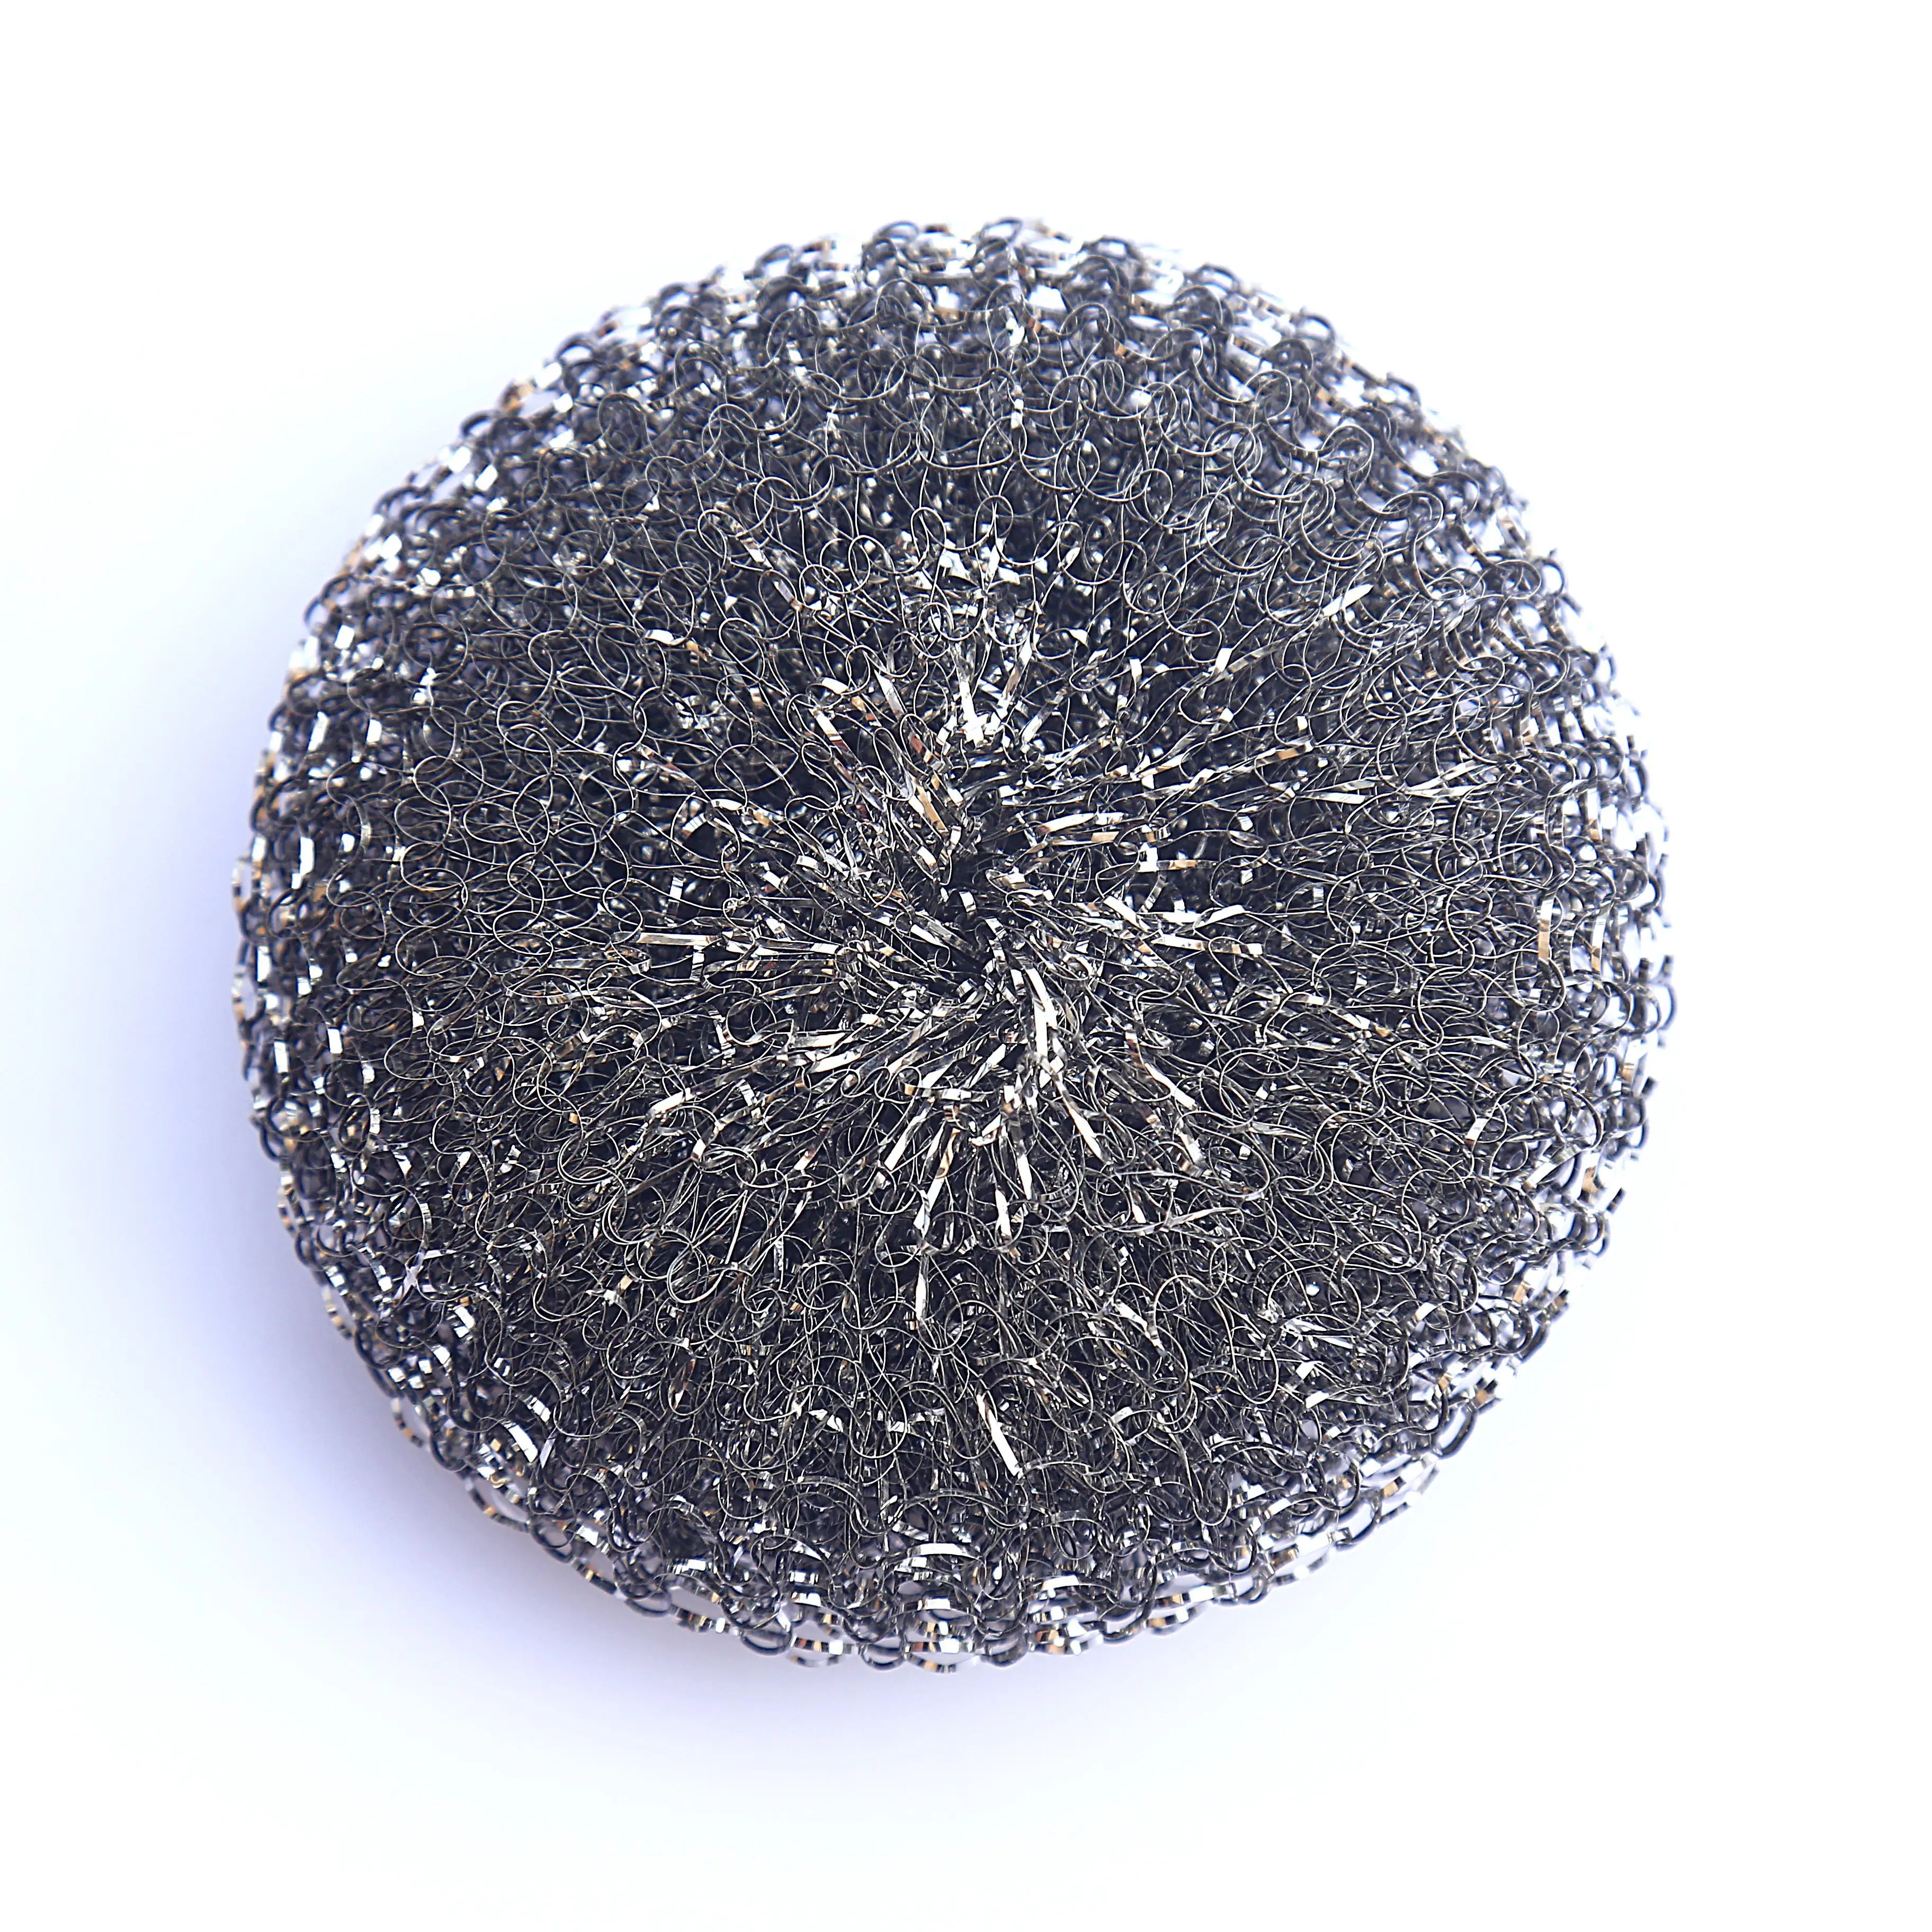 stainless steel mesh cleaning scourer for kitchen cleaning